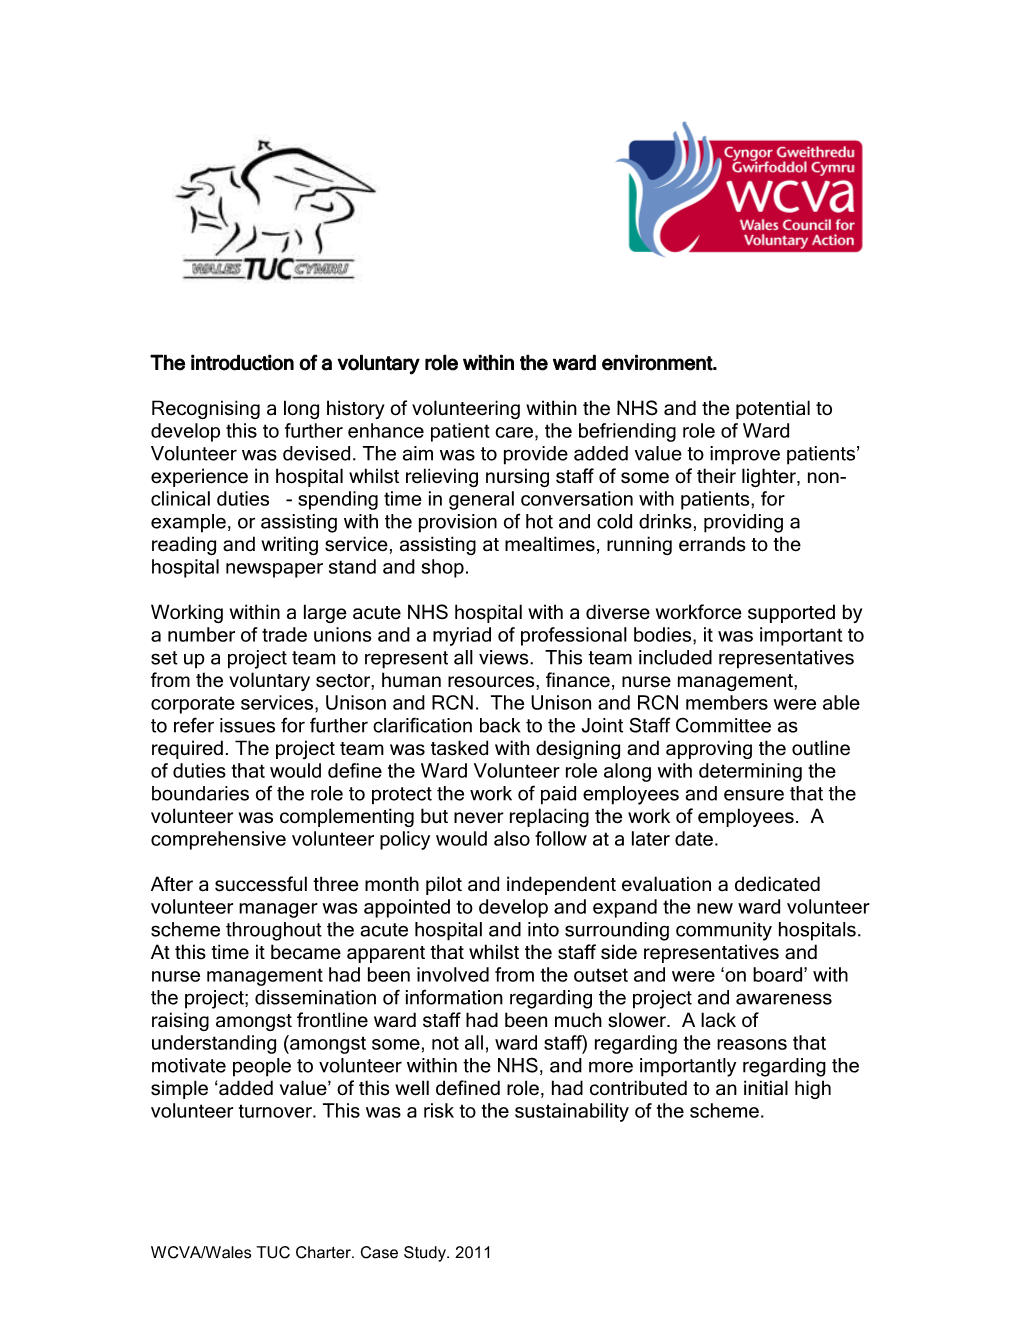 The Introduction of a Voluntary Role Within the Ward Environment